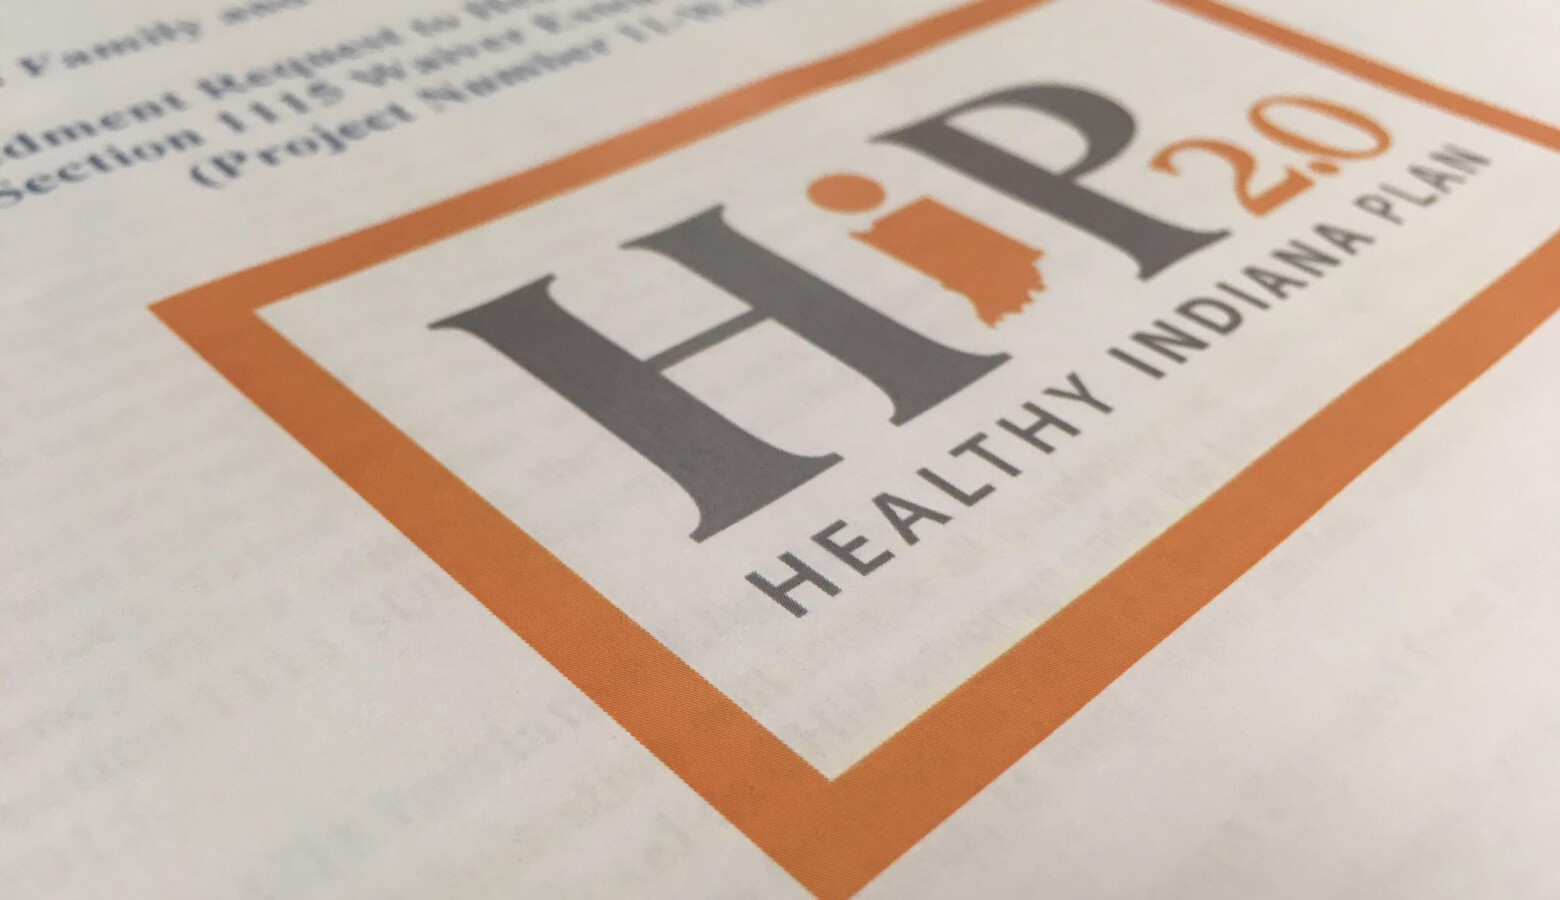 Funding has been approved for the next 10 years for the Healthy Indiana Program.(Sarah Fentem/Side Effects Public Media)